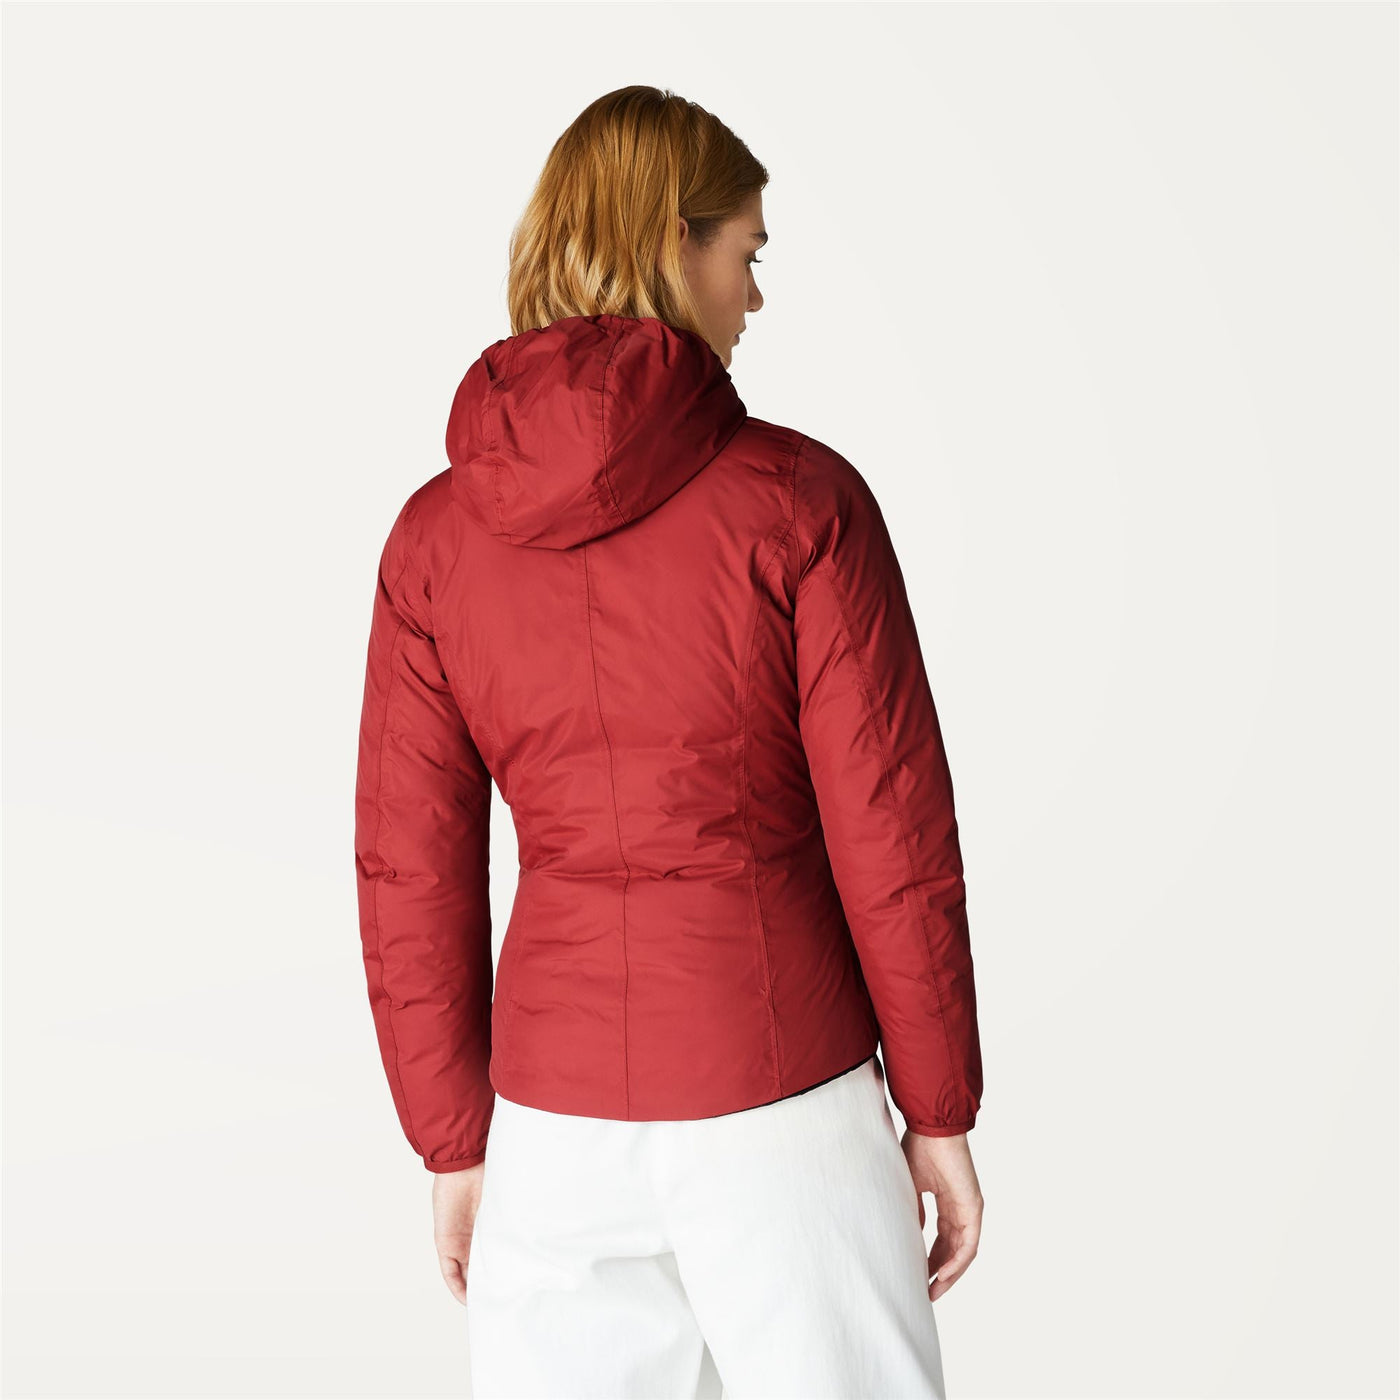 Jackets Woman LILY THERMO PLUS.2 REVERSIBLE Short Red Dk - Black Pure | K-Way Dressed Front Double		